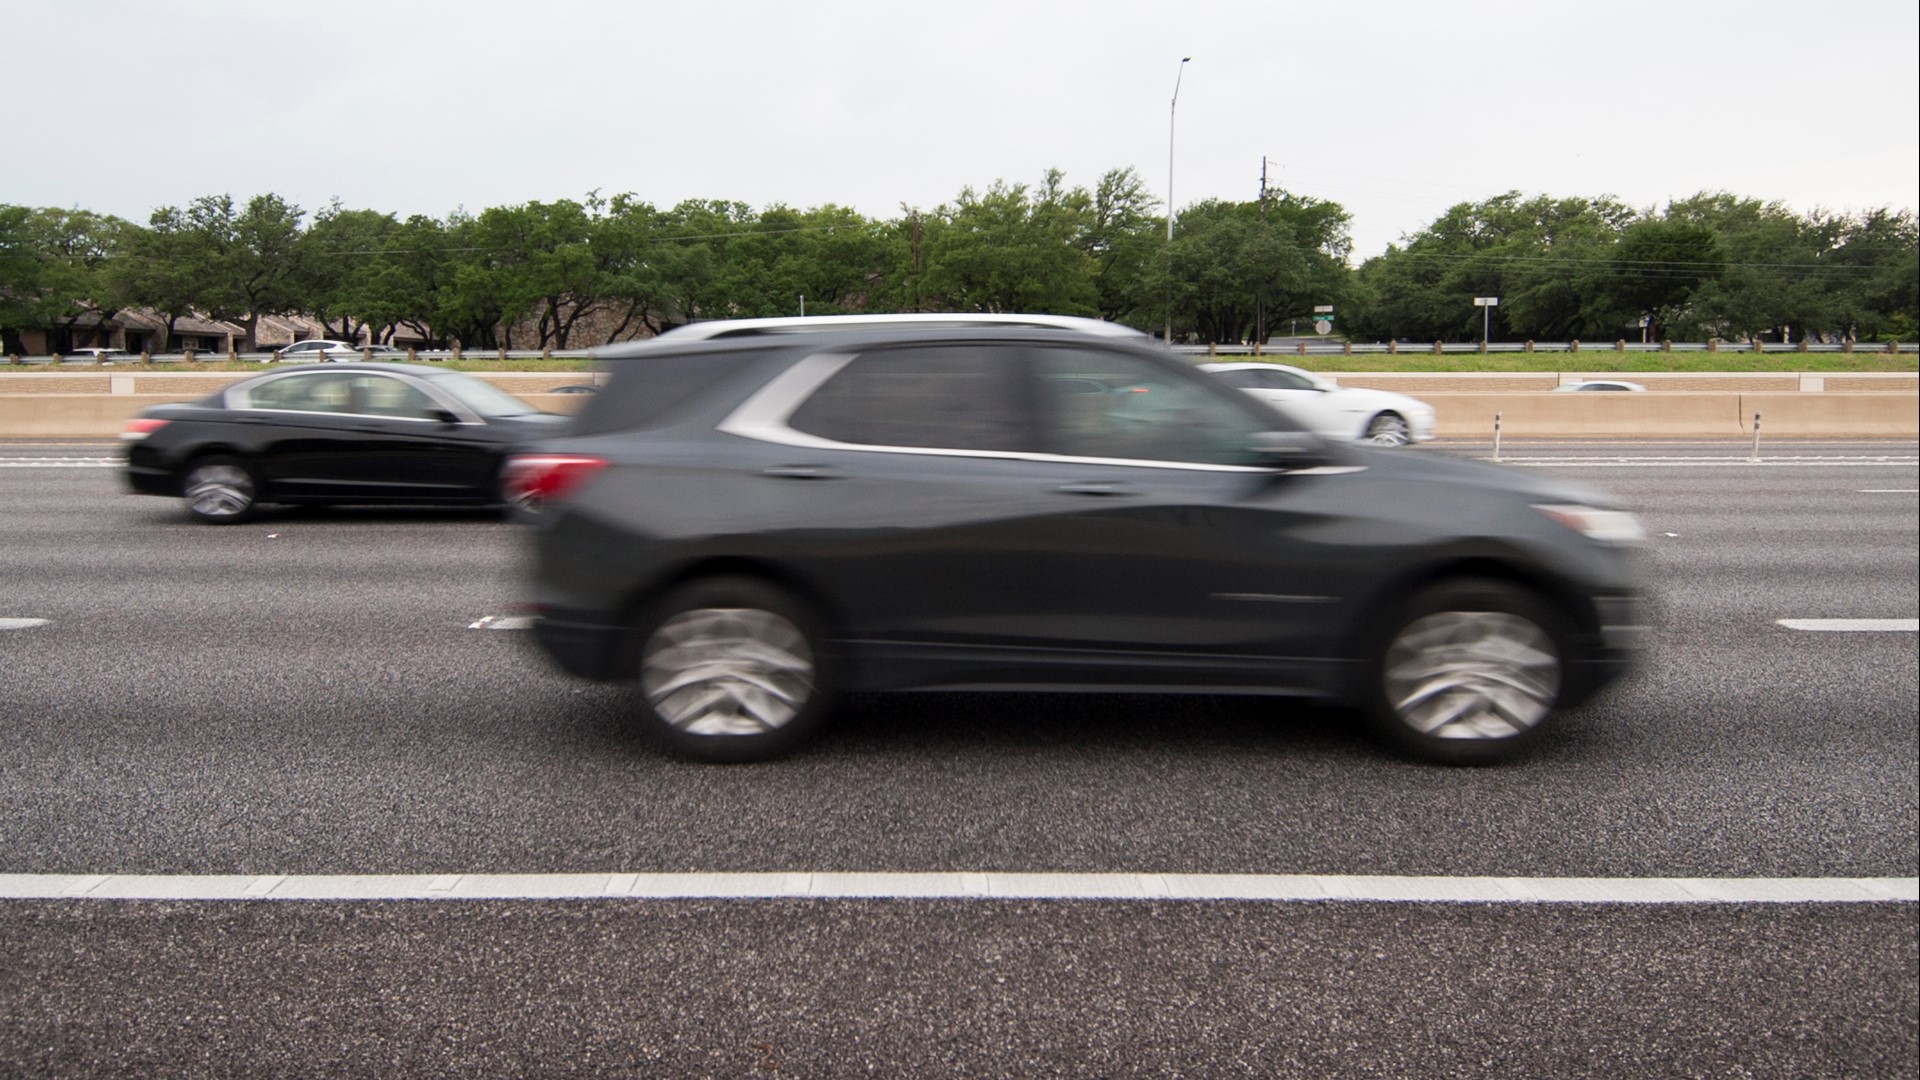 Drivers who travel south on MoPac could be in for longer travel times. That's according to a new report from the Central Texas Regional Mobility Authority.